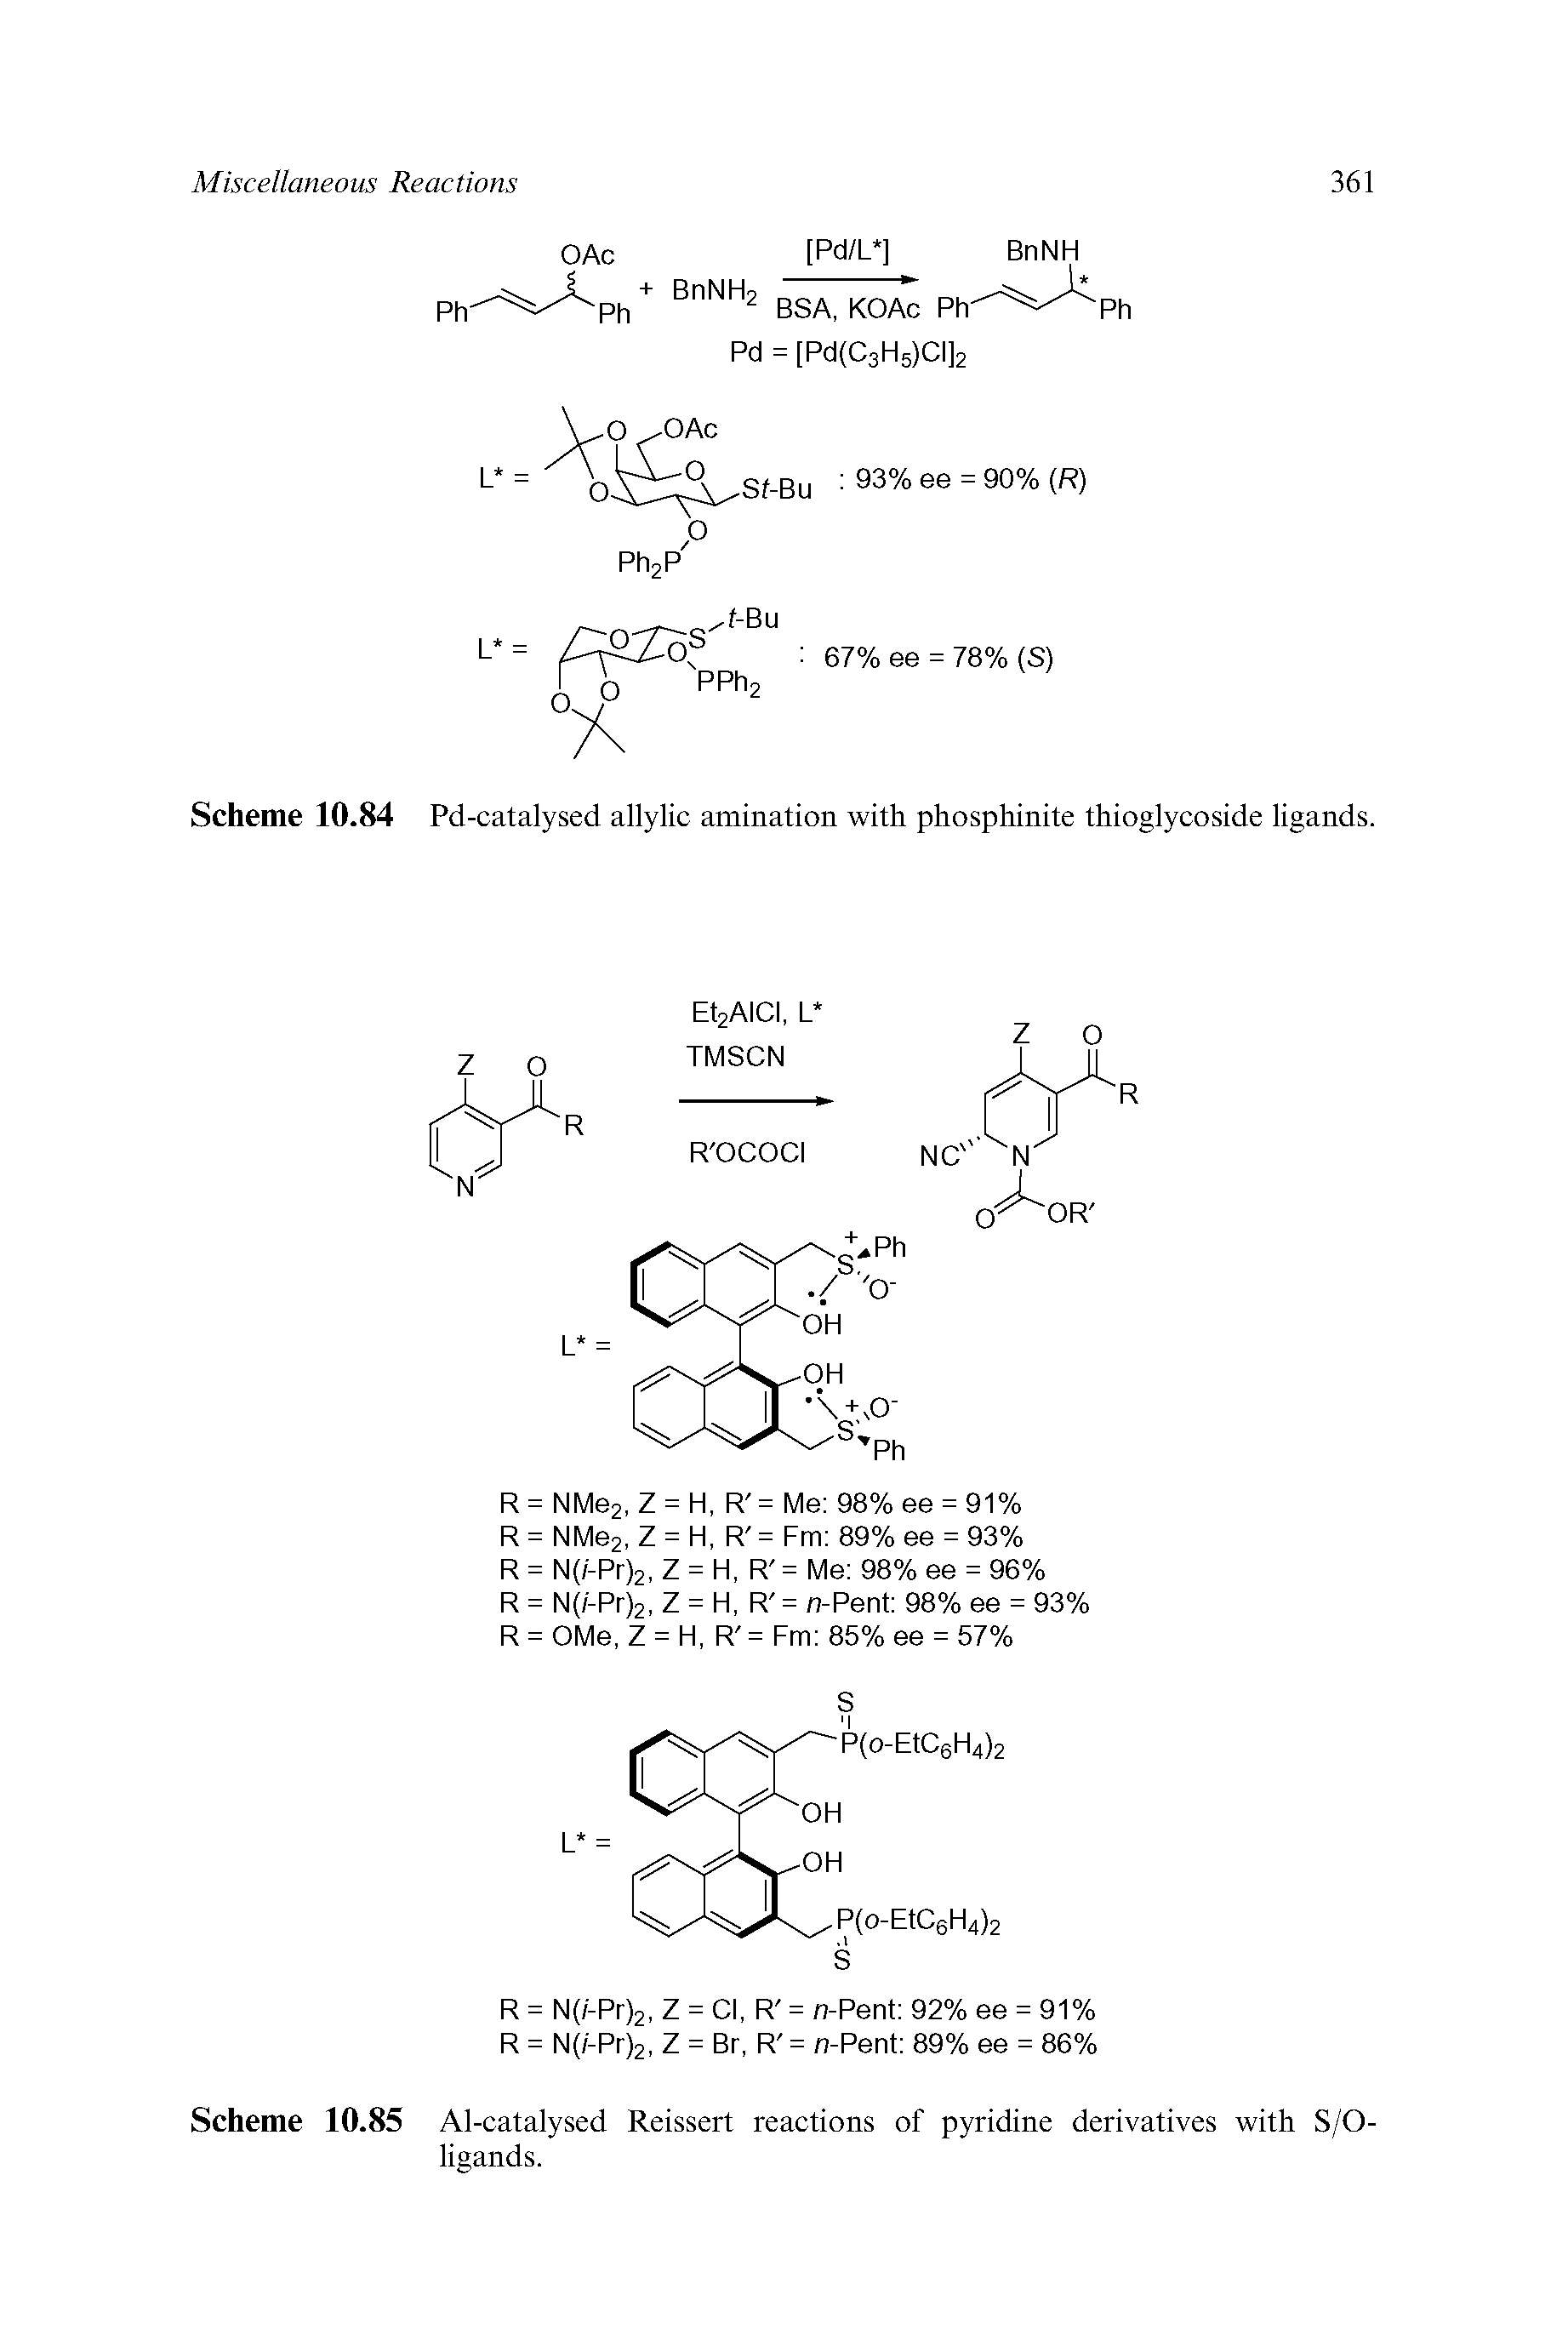 Scheme 10.85 Al-catalysed Reissert reactions of pyridine derivatives with S/O-ligands.